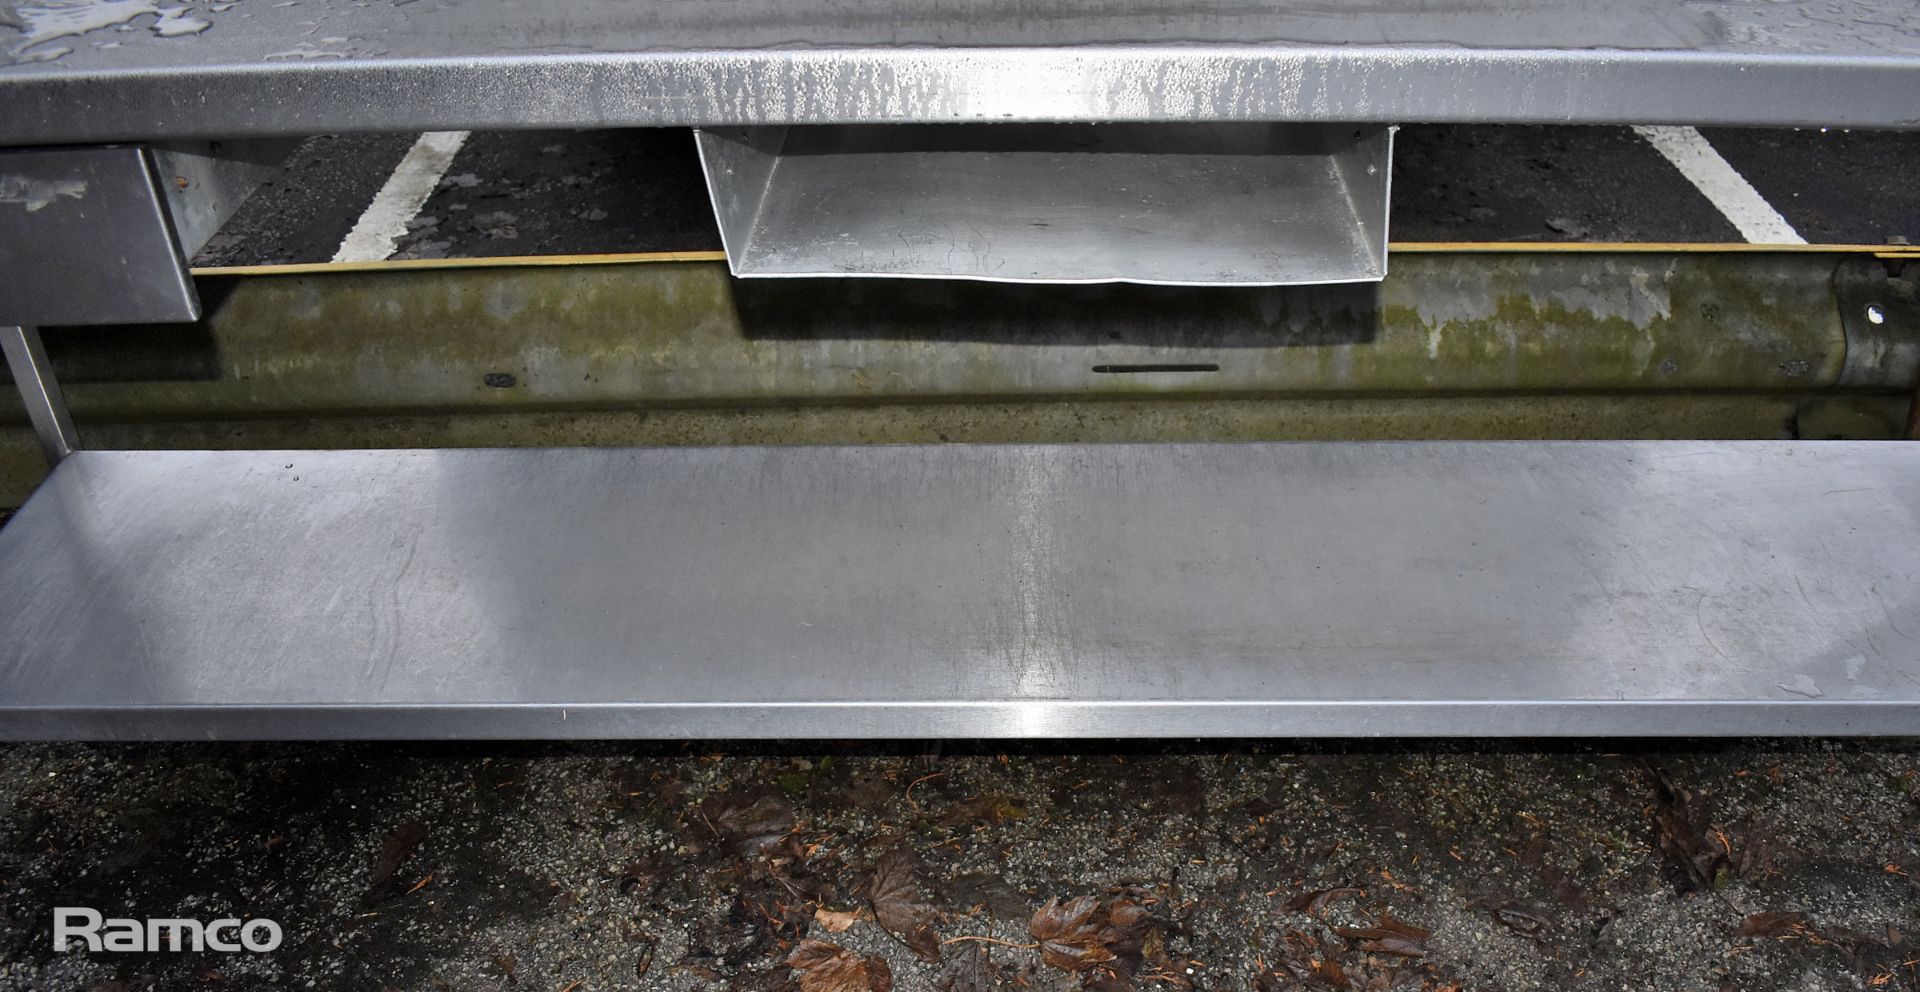 Stainless steel worktop table with drawers - 220x60x90cm - Image 5 of 5